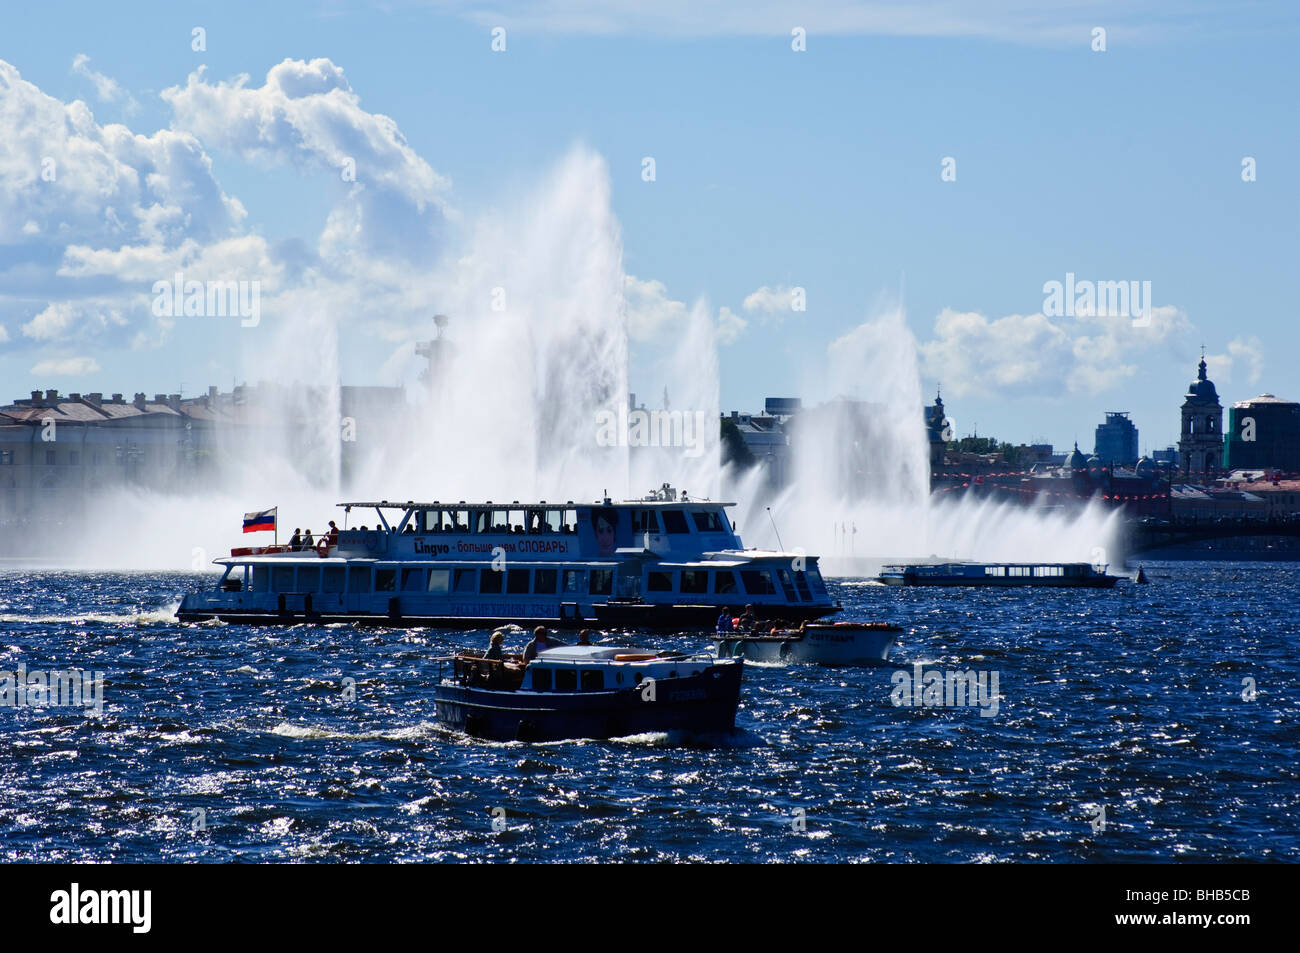 Tourist boats and fountains in the River Neva, St Petersburg, Russia Stock Photo